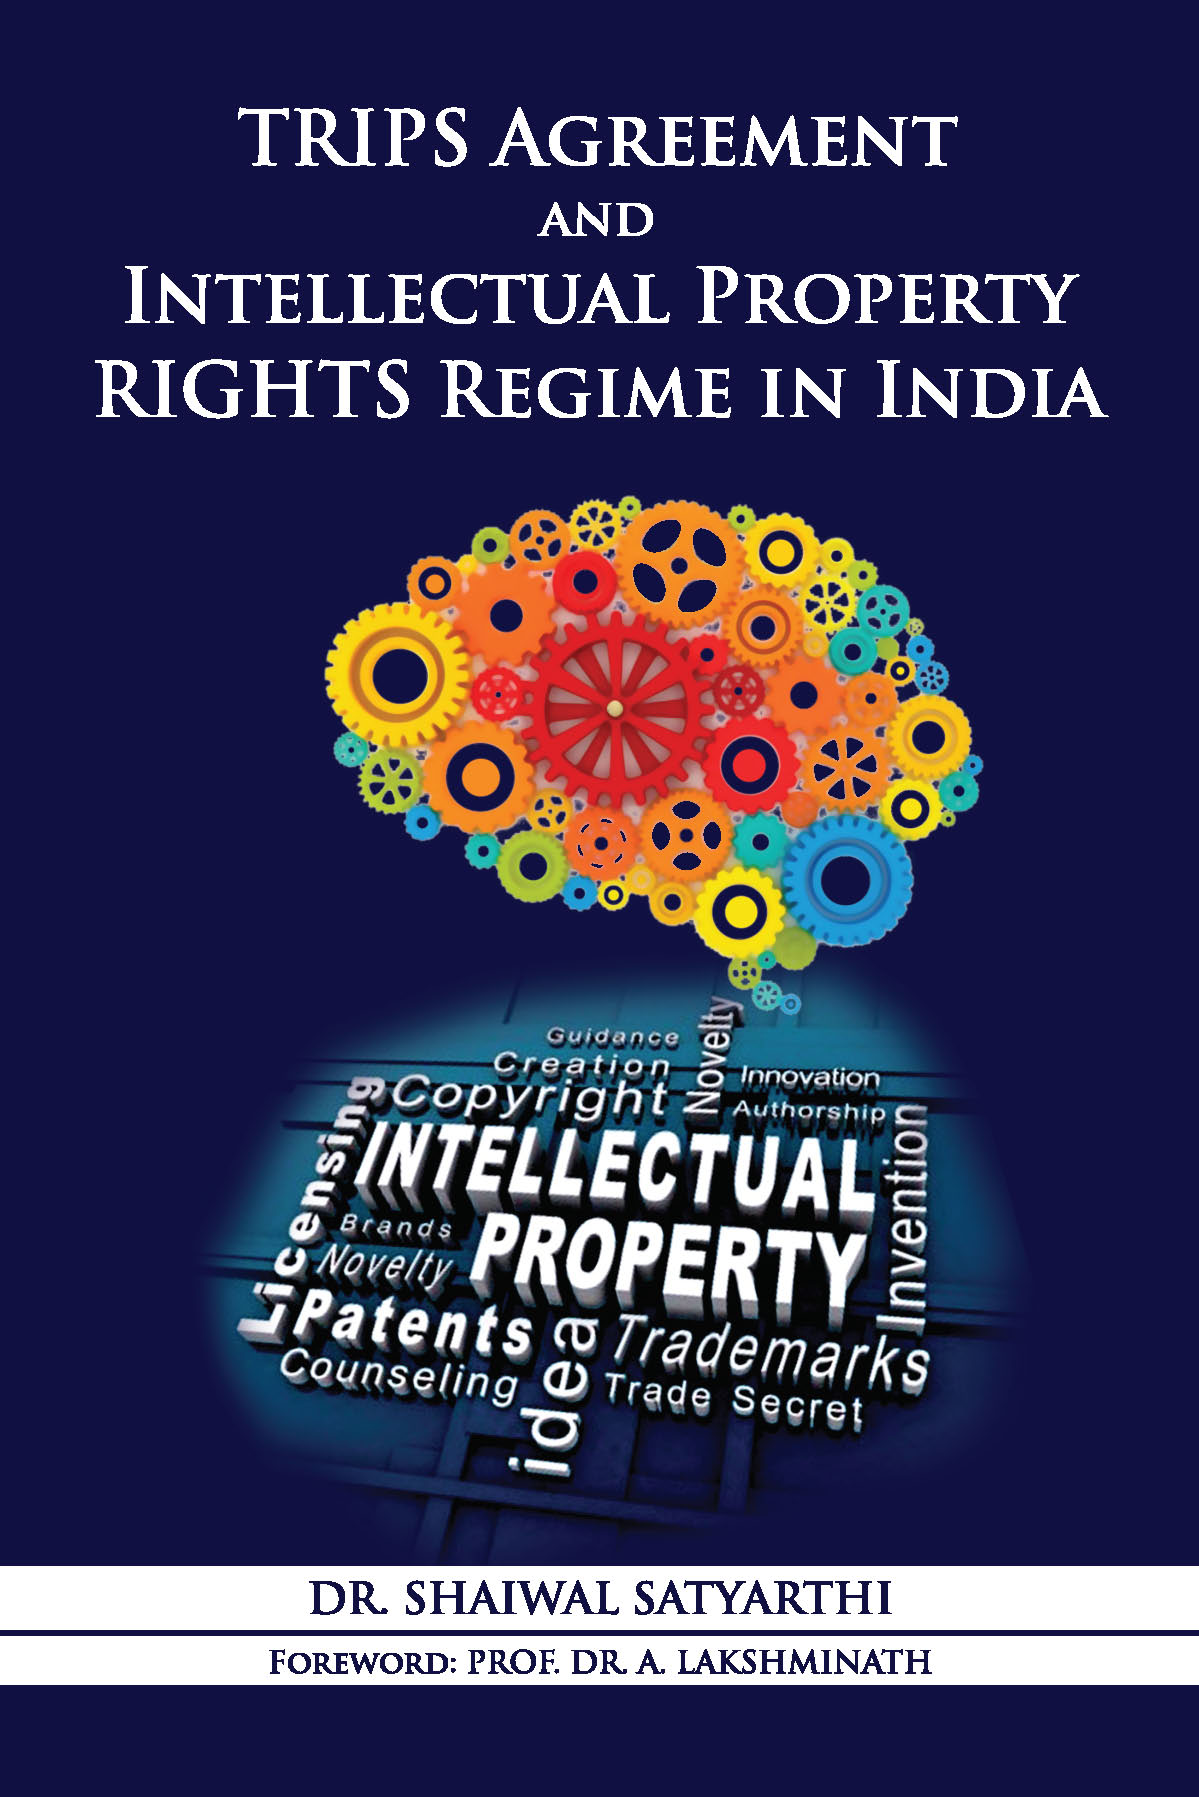 TRIPS Agreement and Intellectual Property Rights Regime in India